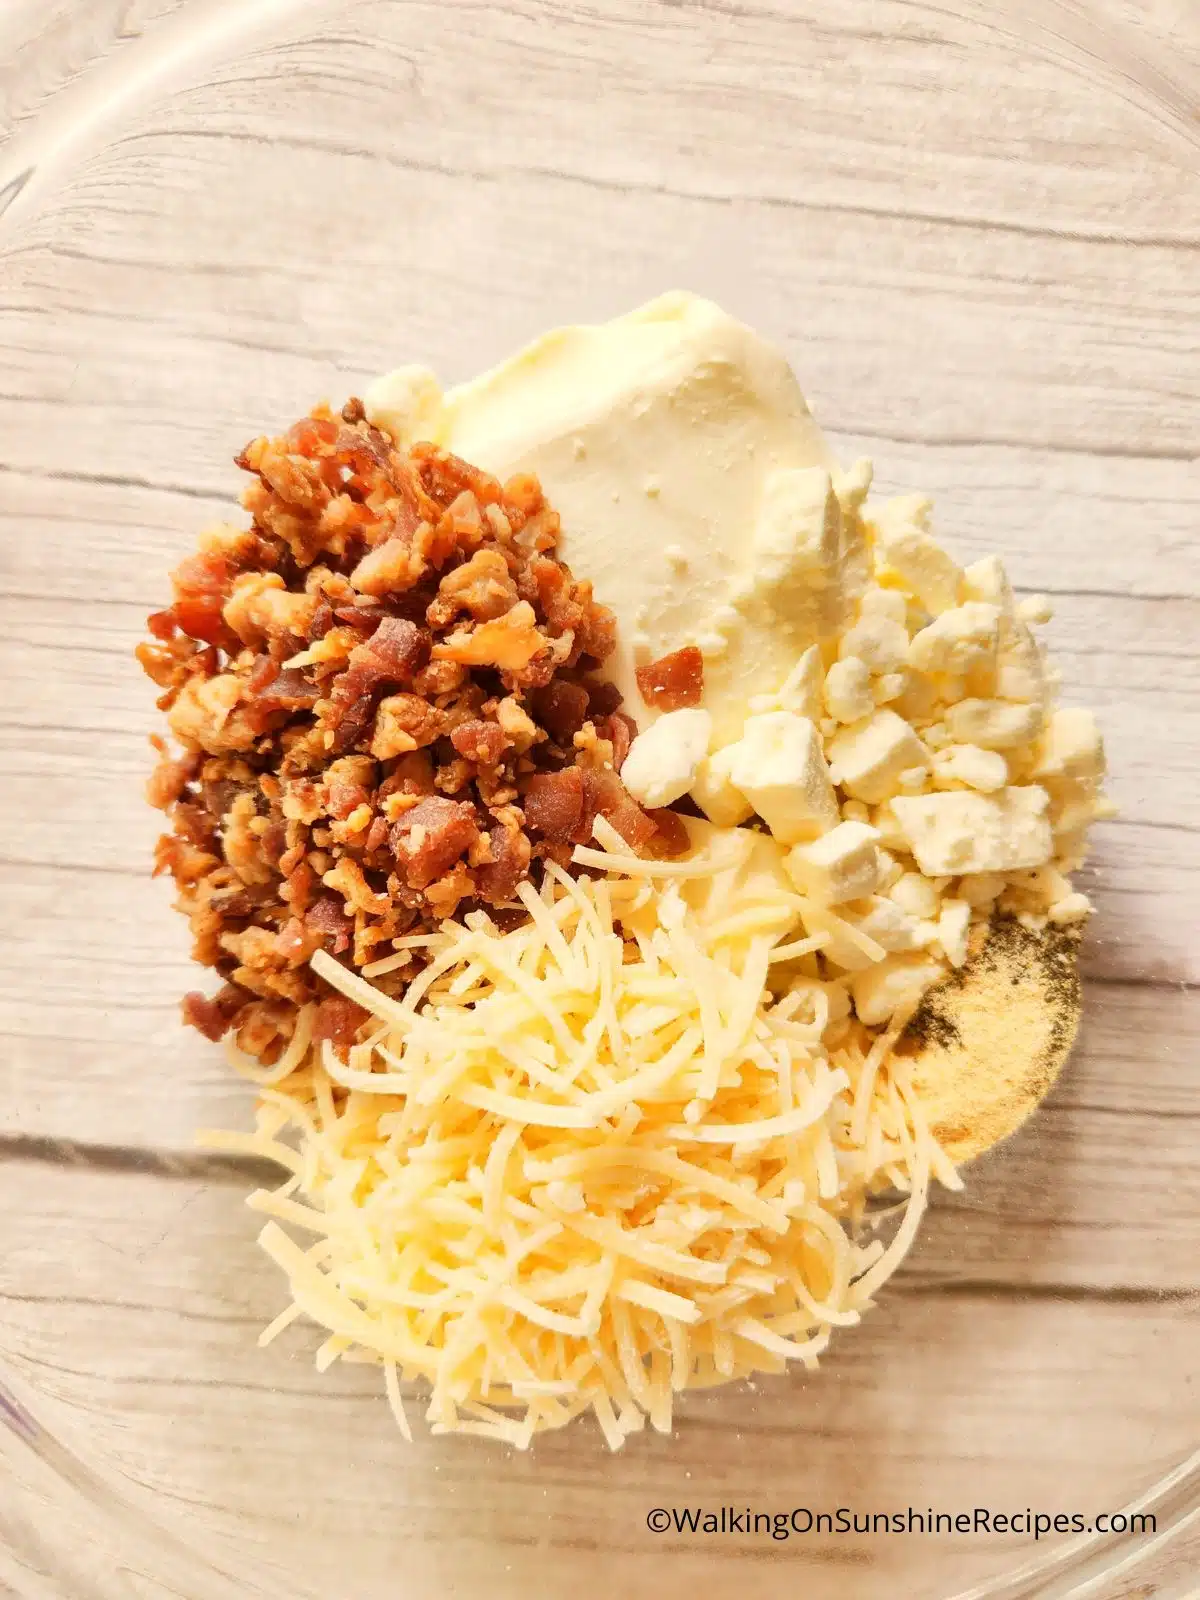 combine cream cheese, white cheddar cheese, bacon and spices together in bowl.